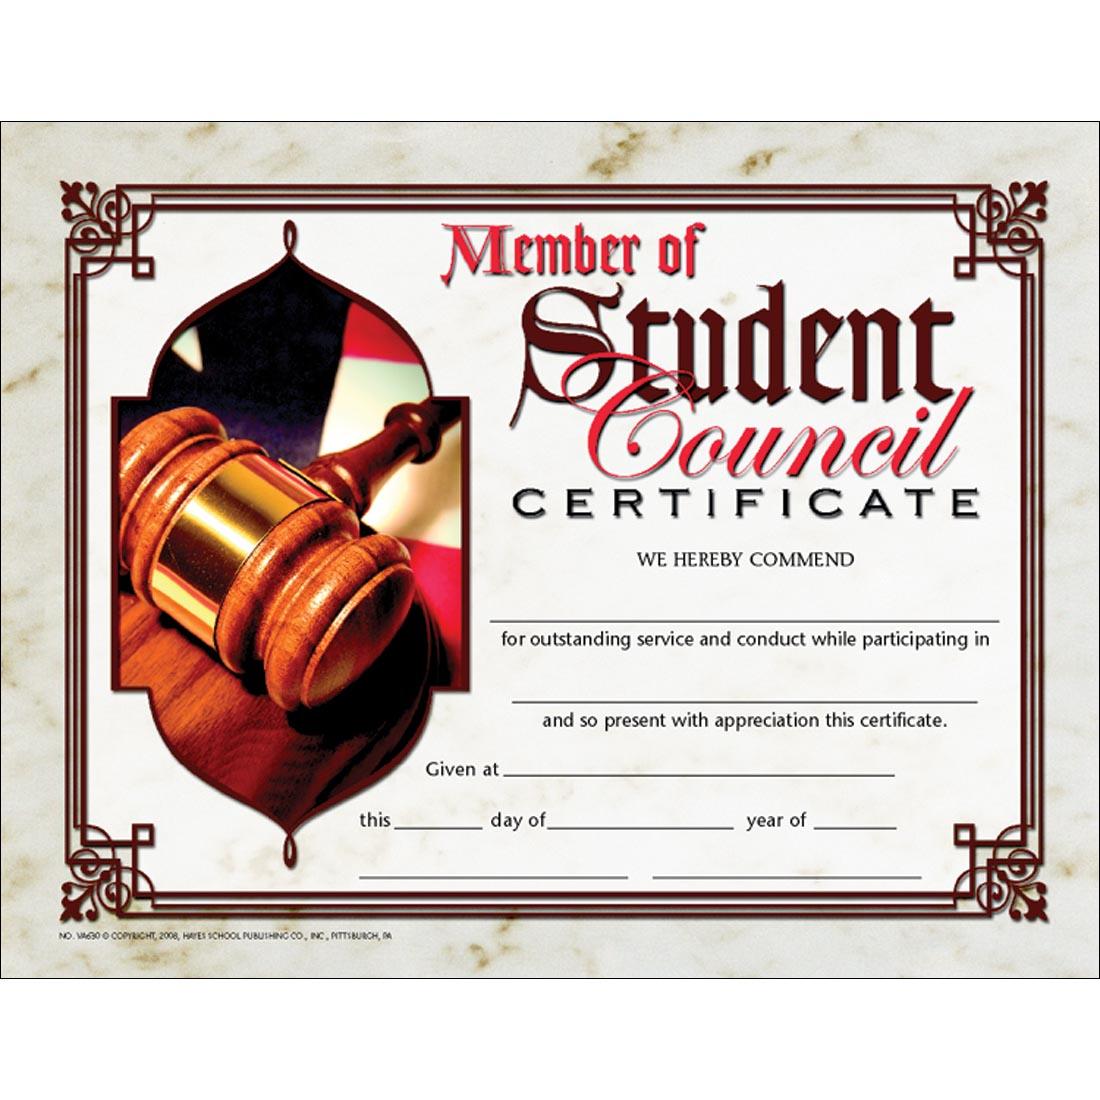 Member of Student Council Certificate